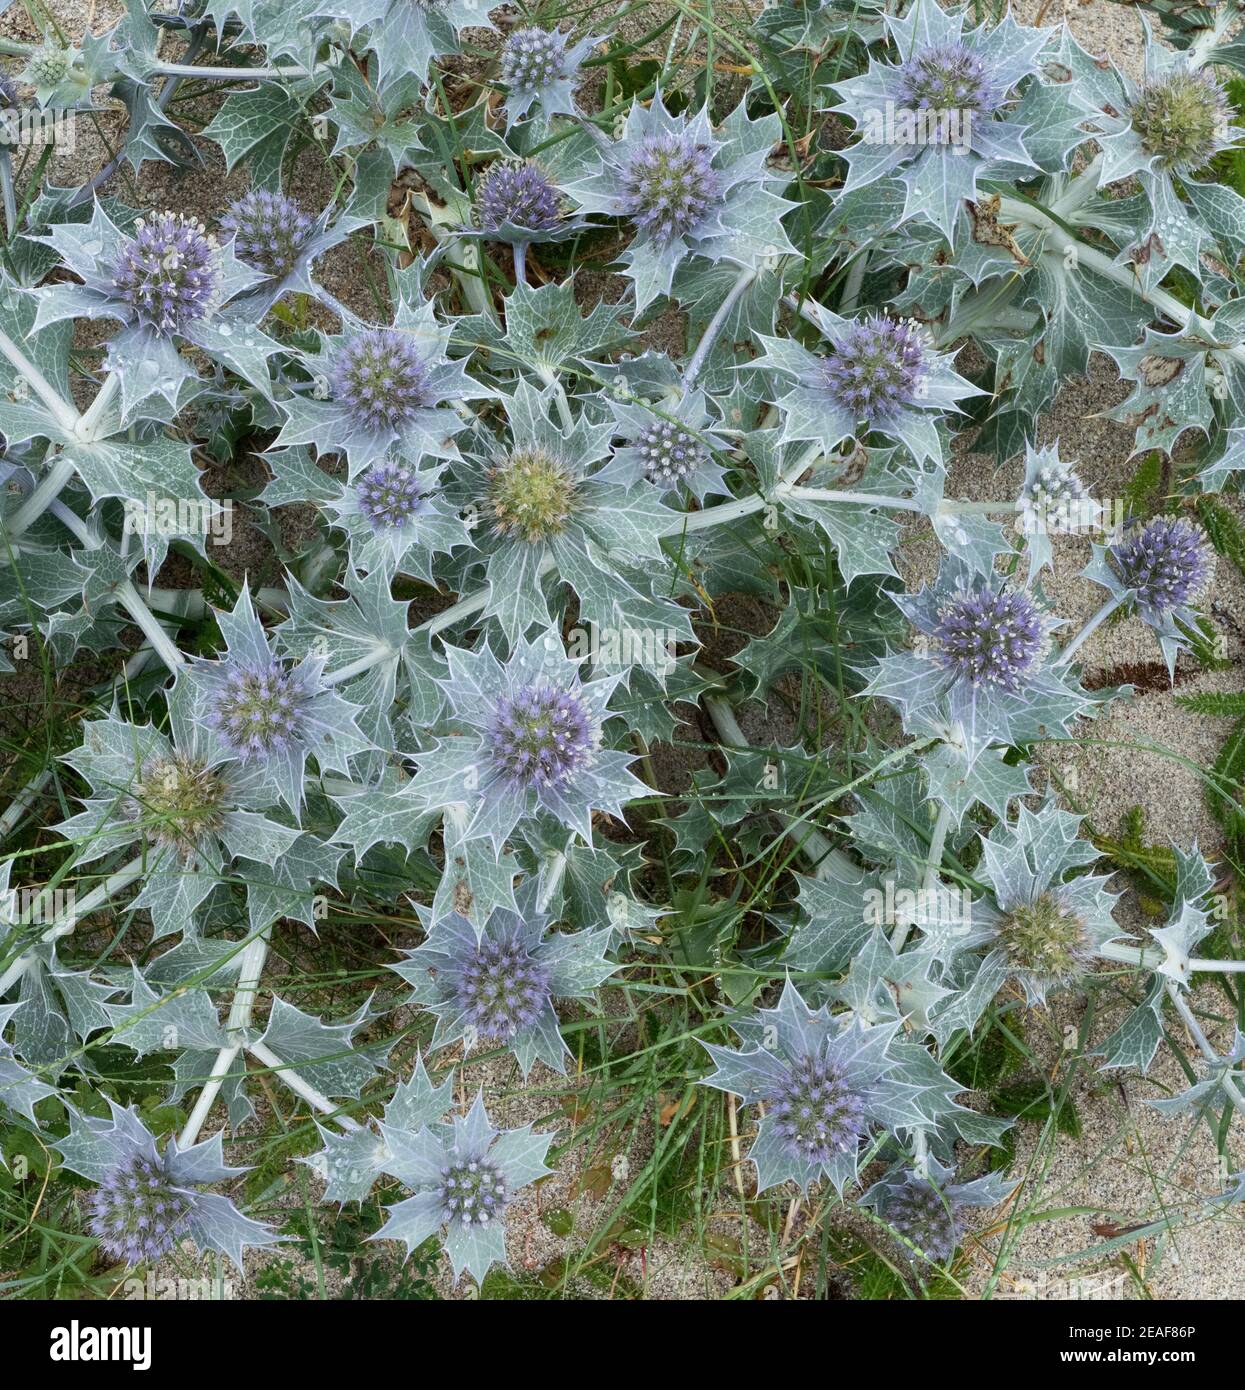 Blue flowers and silvery leaves of Sea Holly Eryngium growing in dunes on the Gower coast of South Wales UK Stock Photo